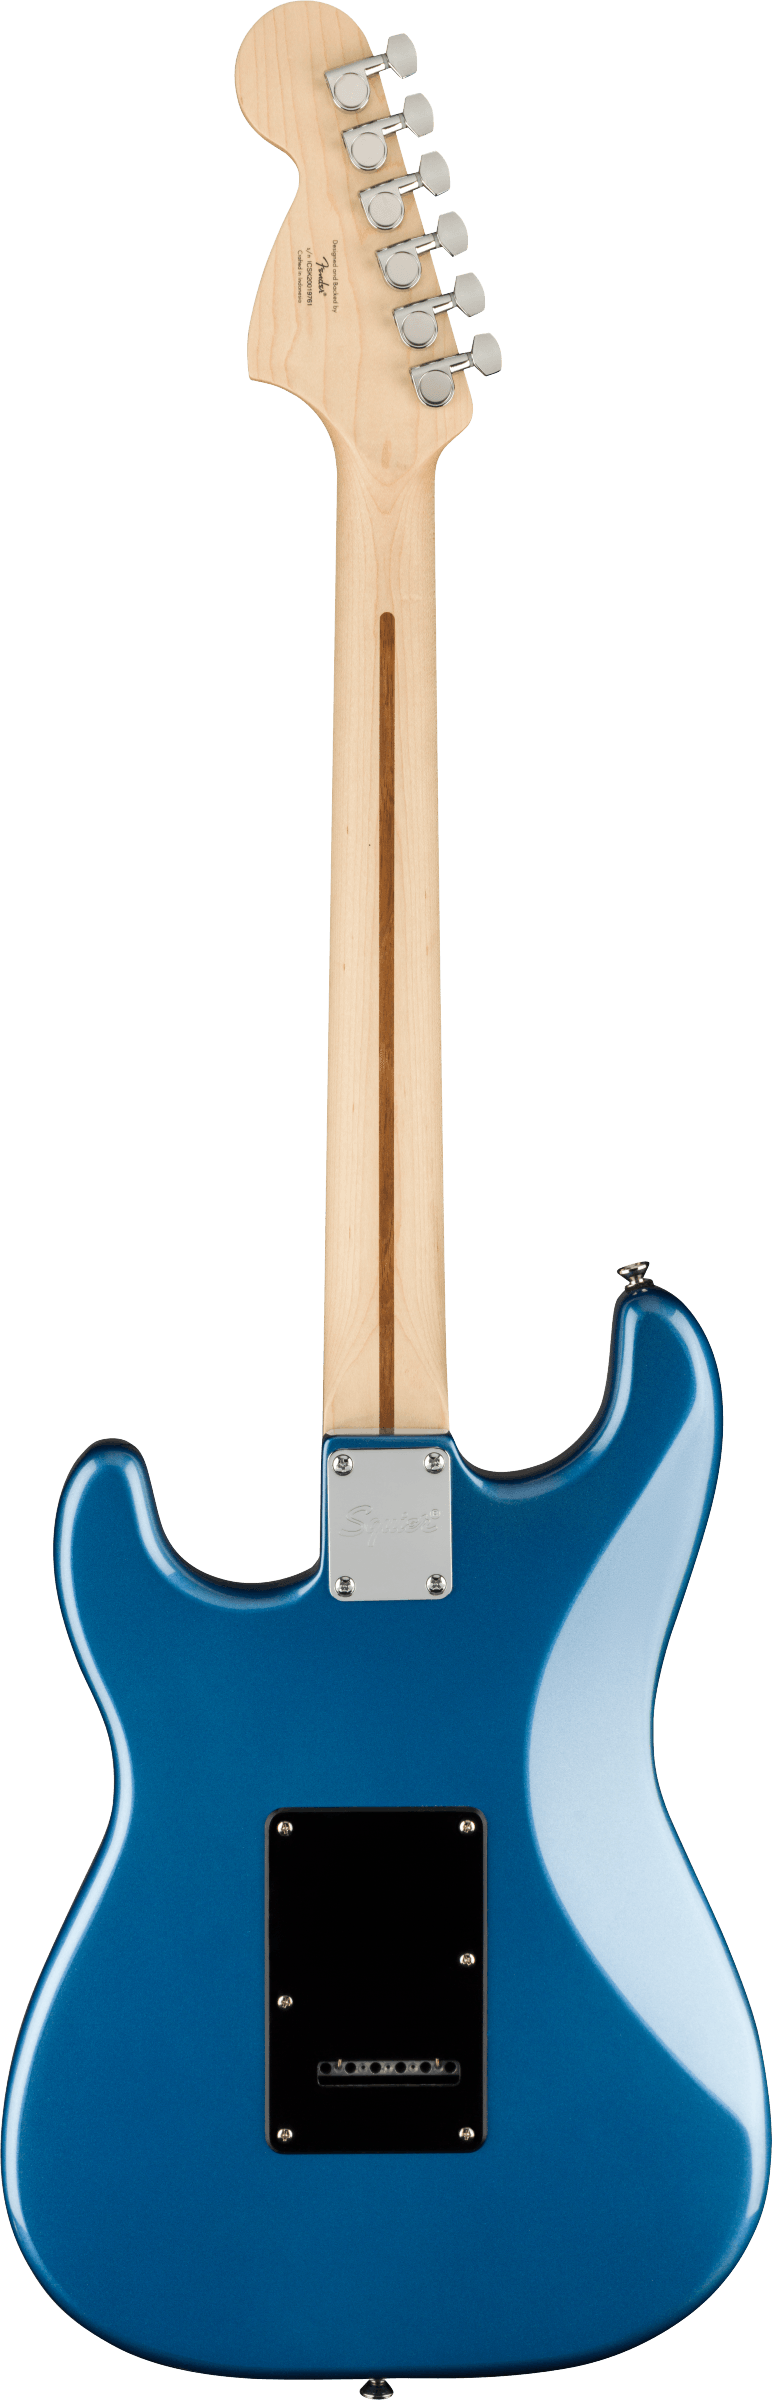 Squier Affinity Stratocaster Electric Guitar in Lake Placid Blue -  Andertons Music Co.